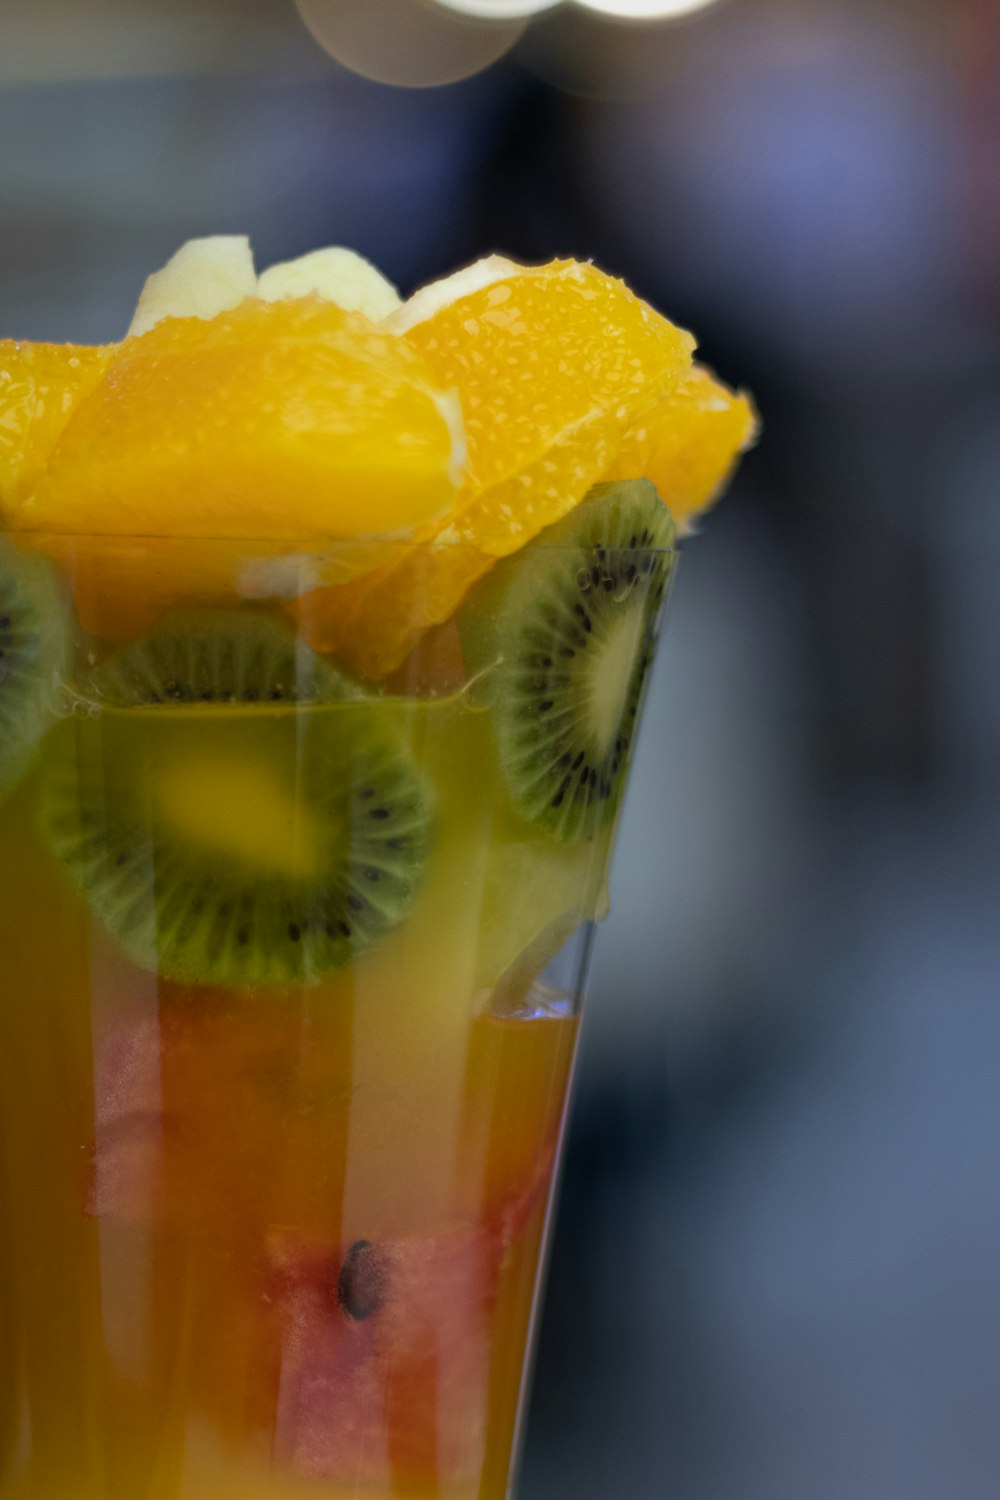 a close up of a fruit drink in a glass